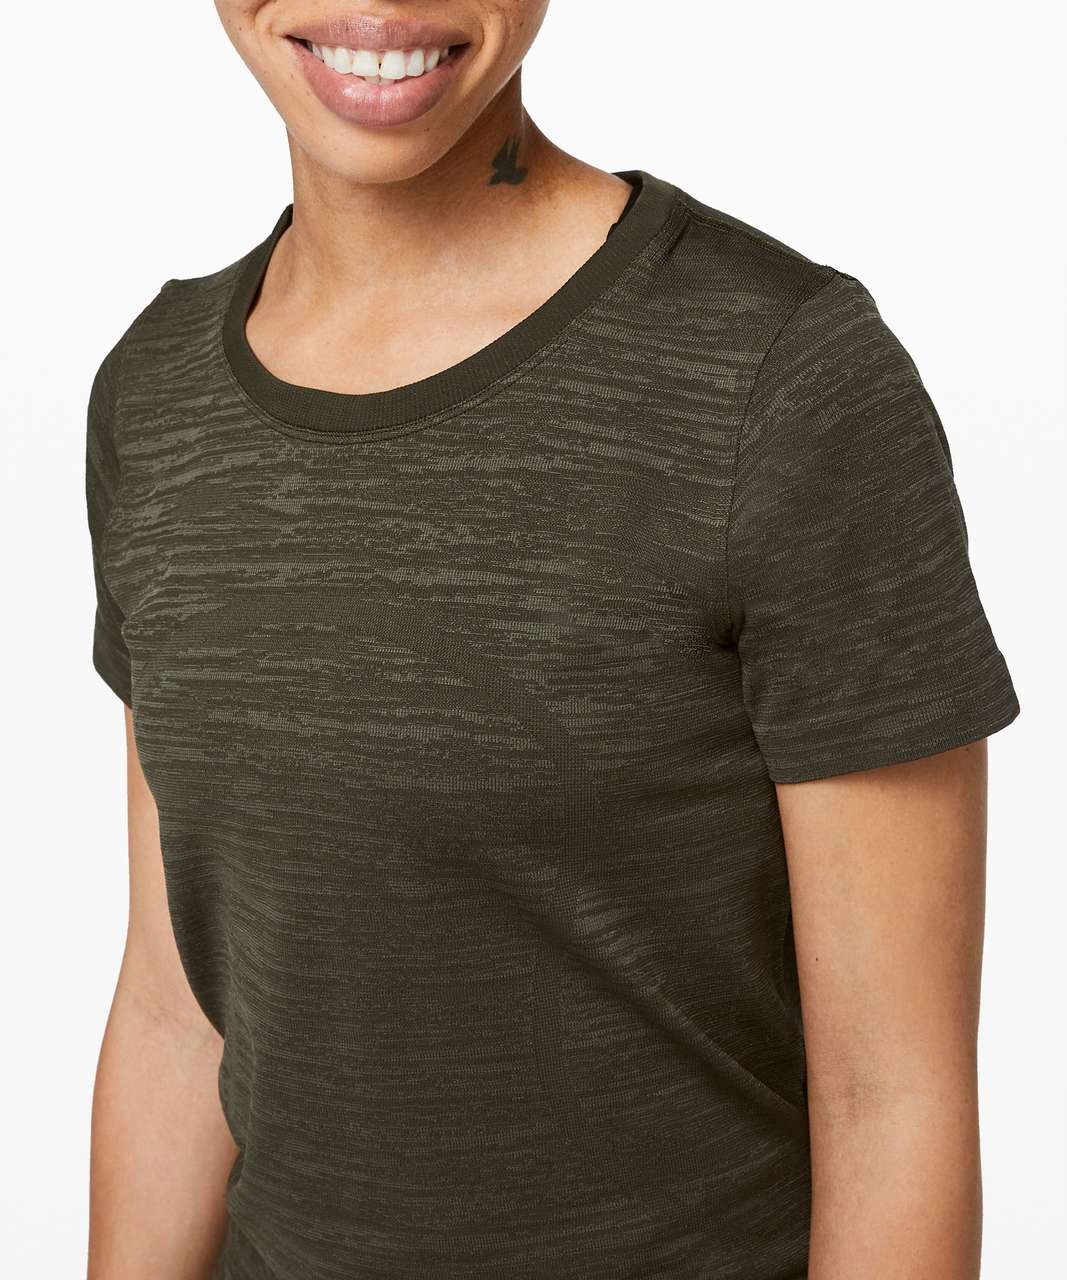 Lululemon Swiftly Tech Short Sleeve (Breeze) *Relaxed Fit - Dark Olive / Fatigue Green